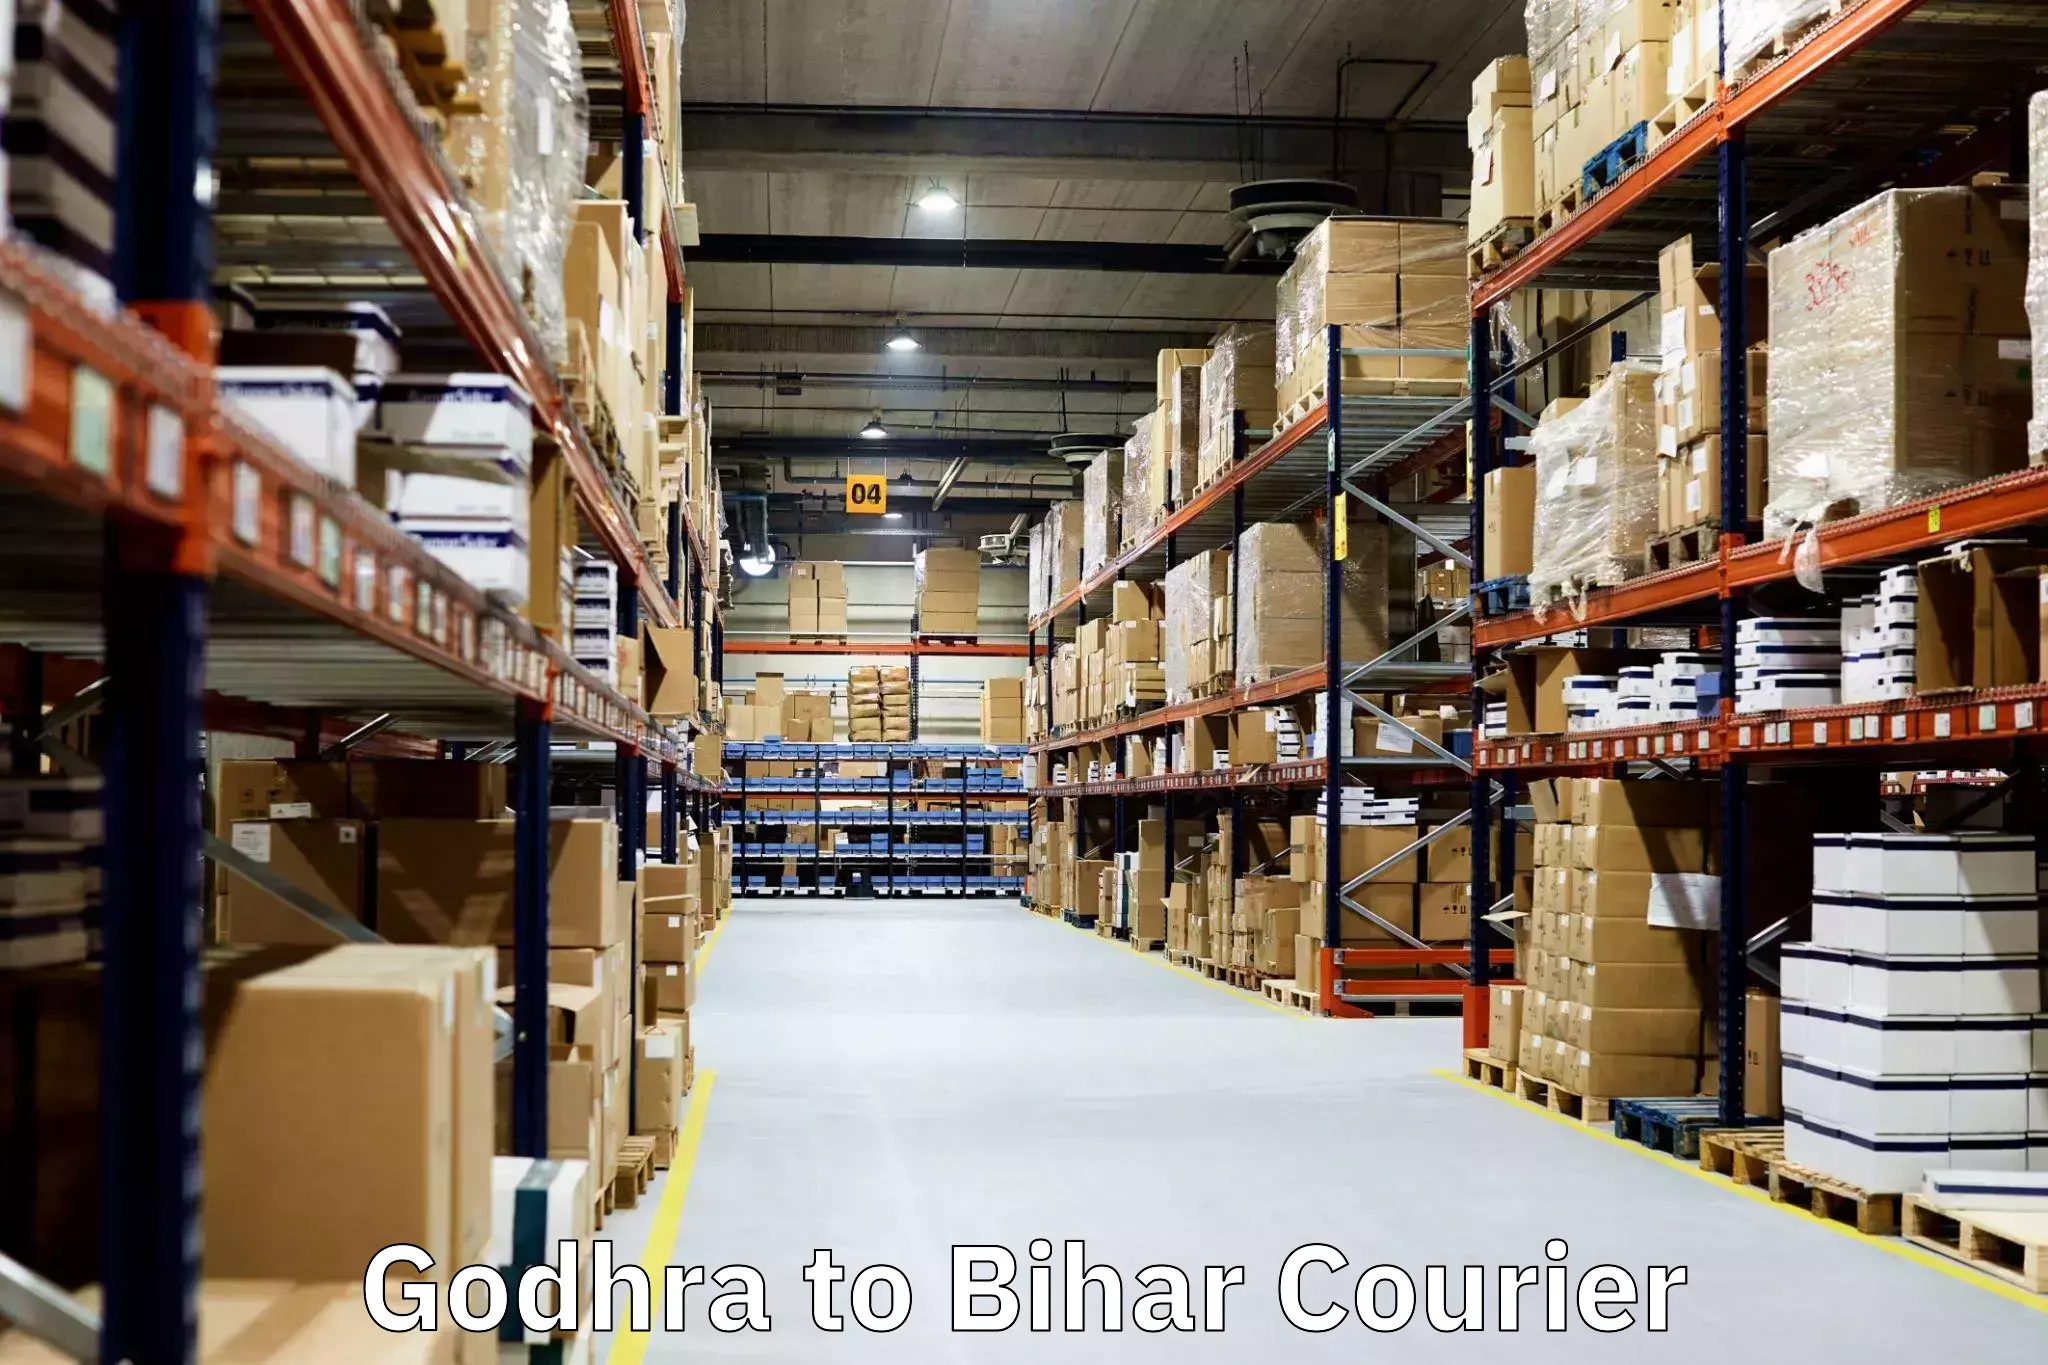 Home moving specialists Godhra to Bihar